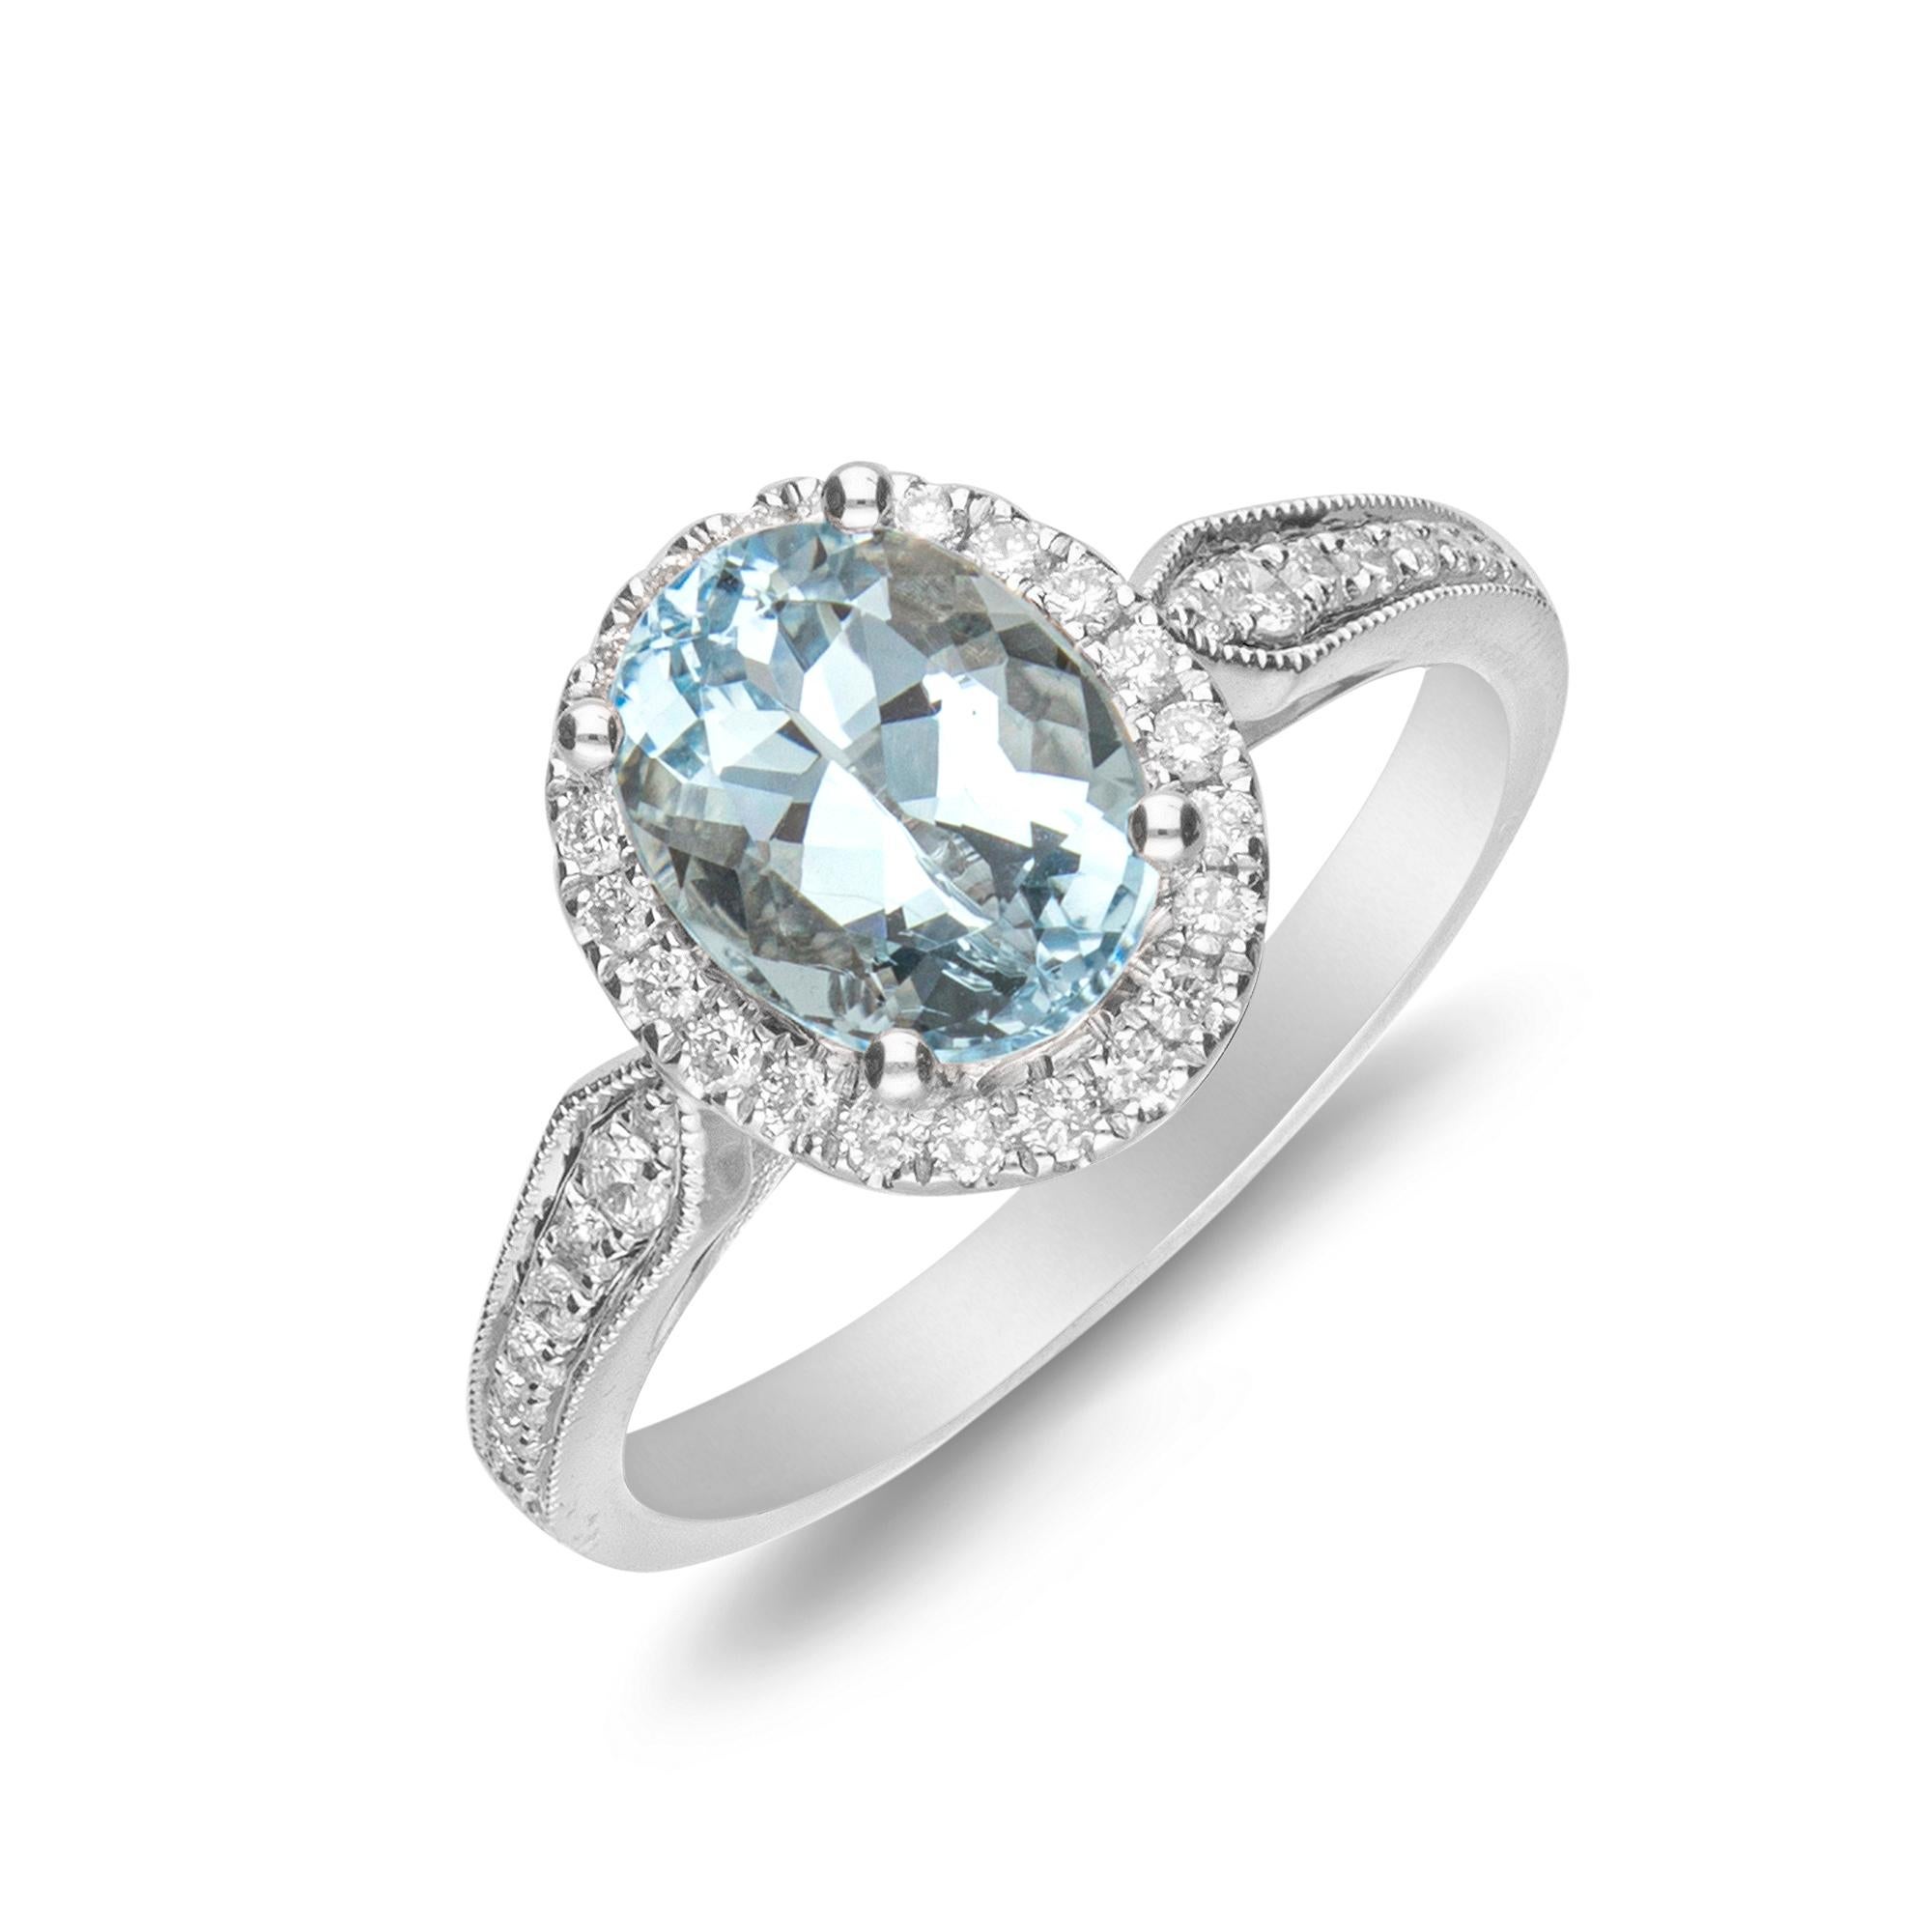 1.71 Carat Oval-Cut Aquamarine Diamond Accents 14K White Gold Ring In New Condition For Sale In New York, NY